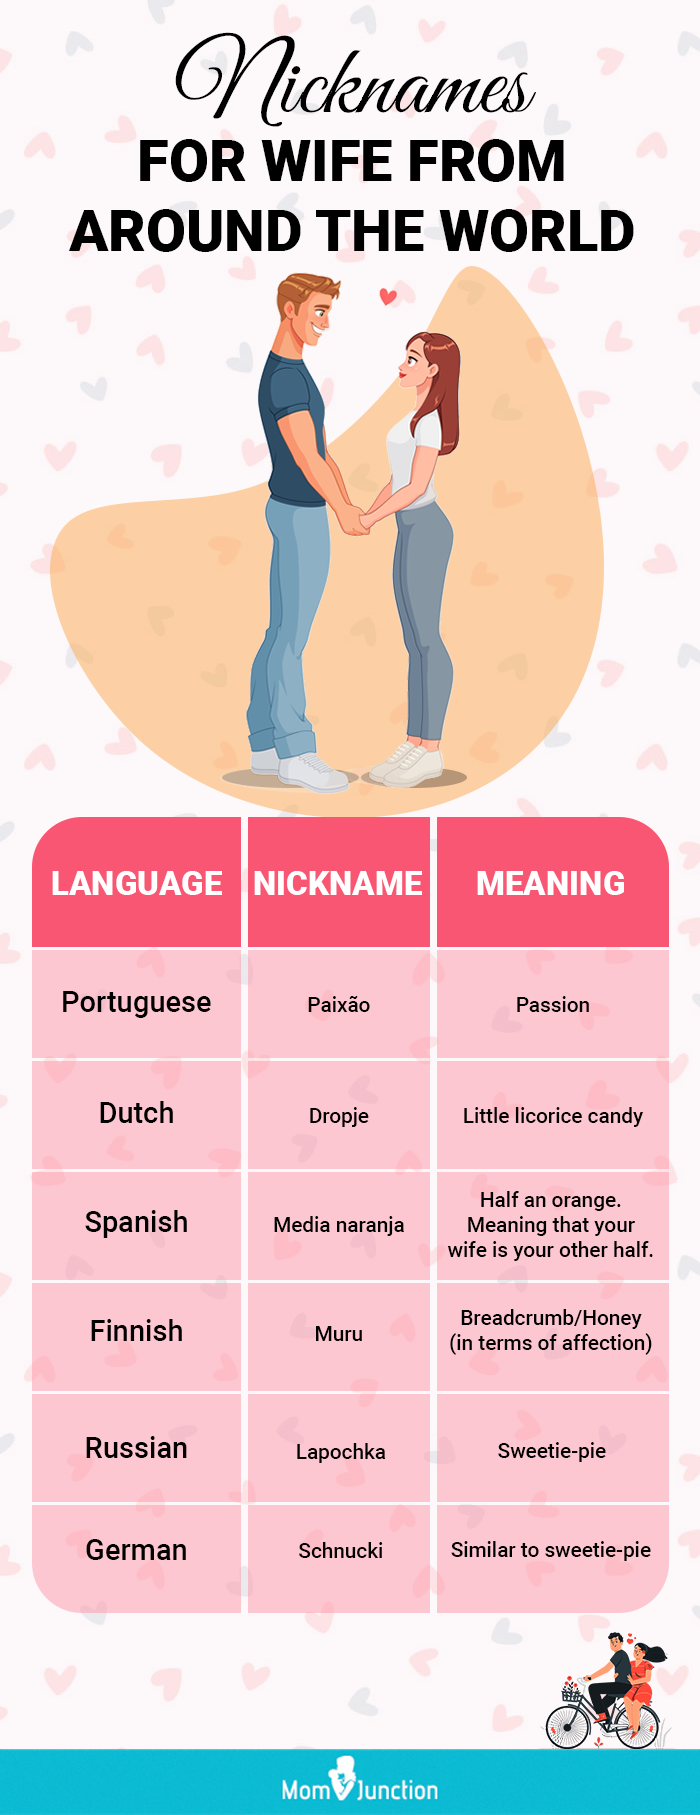 nicknames for wife from around the world (infographic)